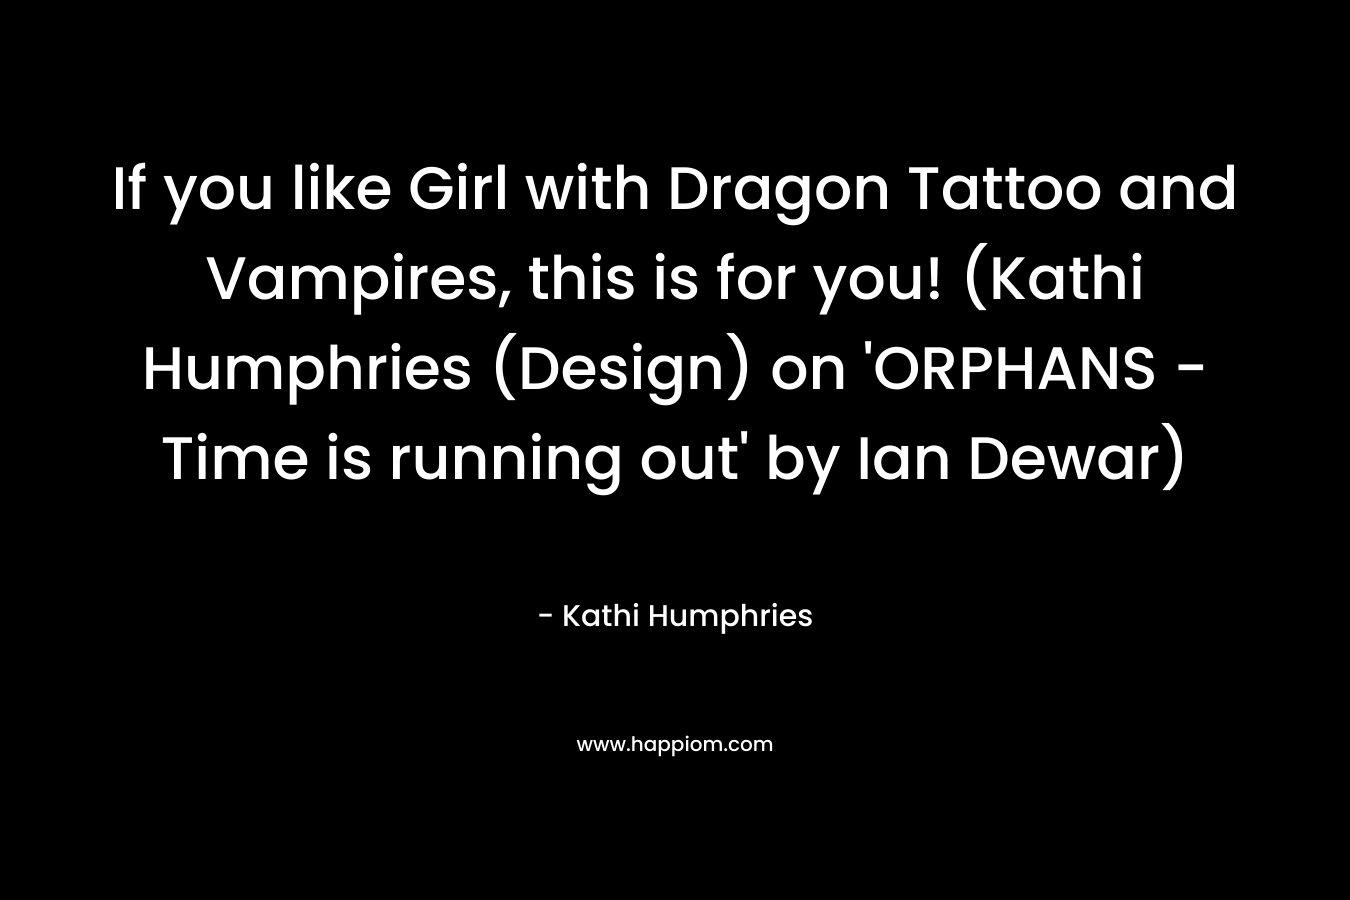 If you like Girl with Dragon Tattoo and Vampires, this is for you! (Kathi Humphries (Design) on ‘ORPHANS – Time is running out’ by Ian Dewar) – Kathi Humphries